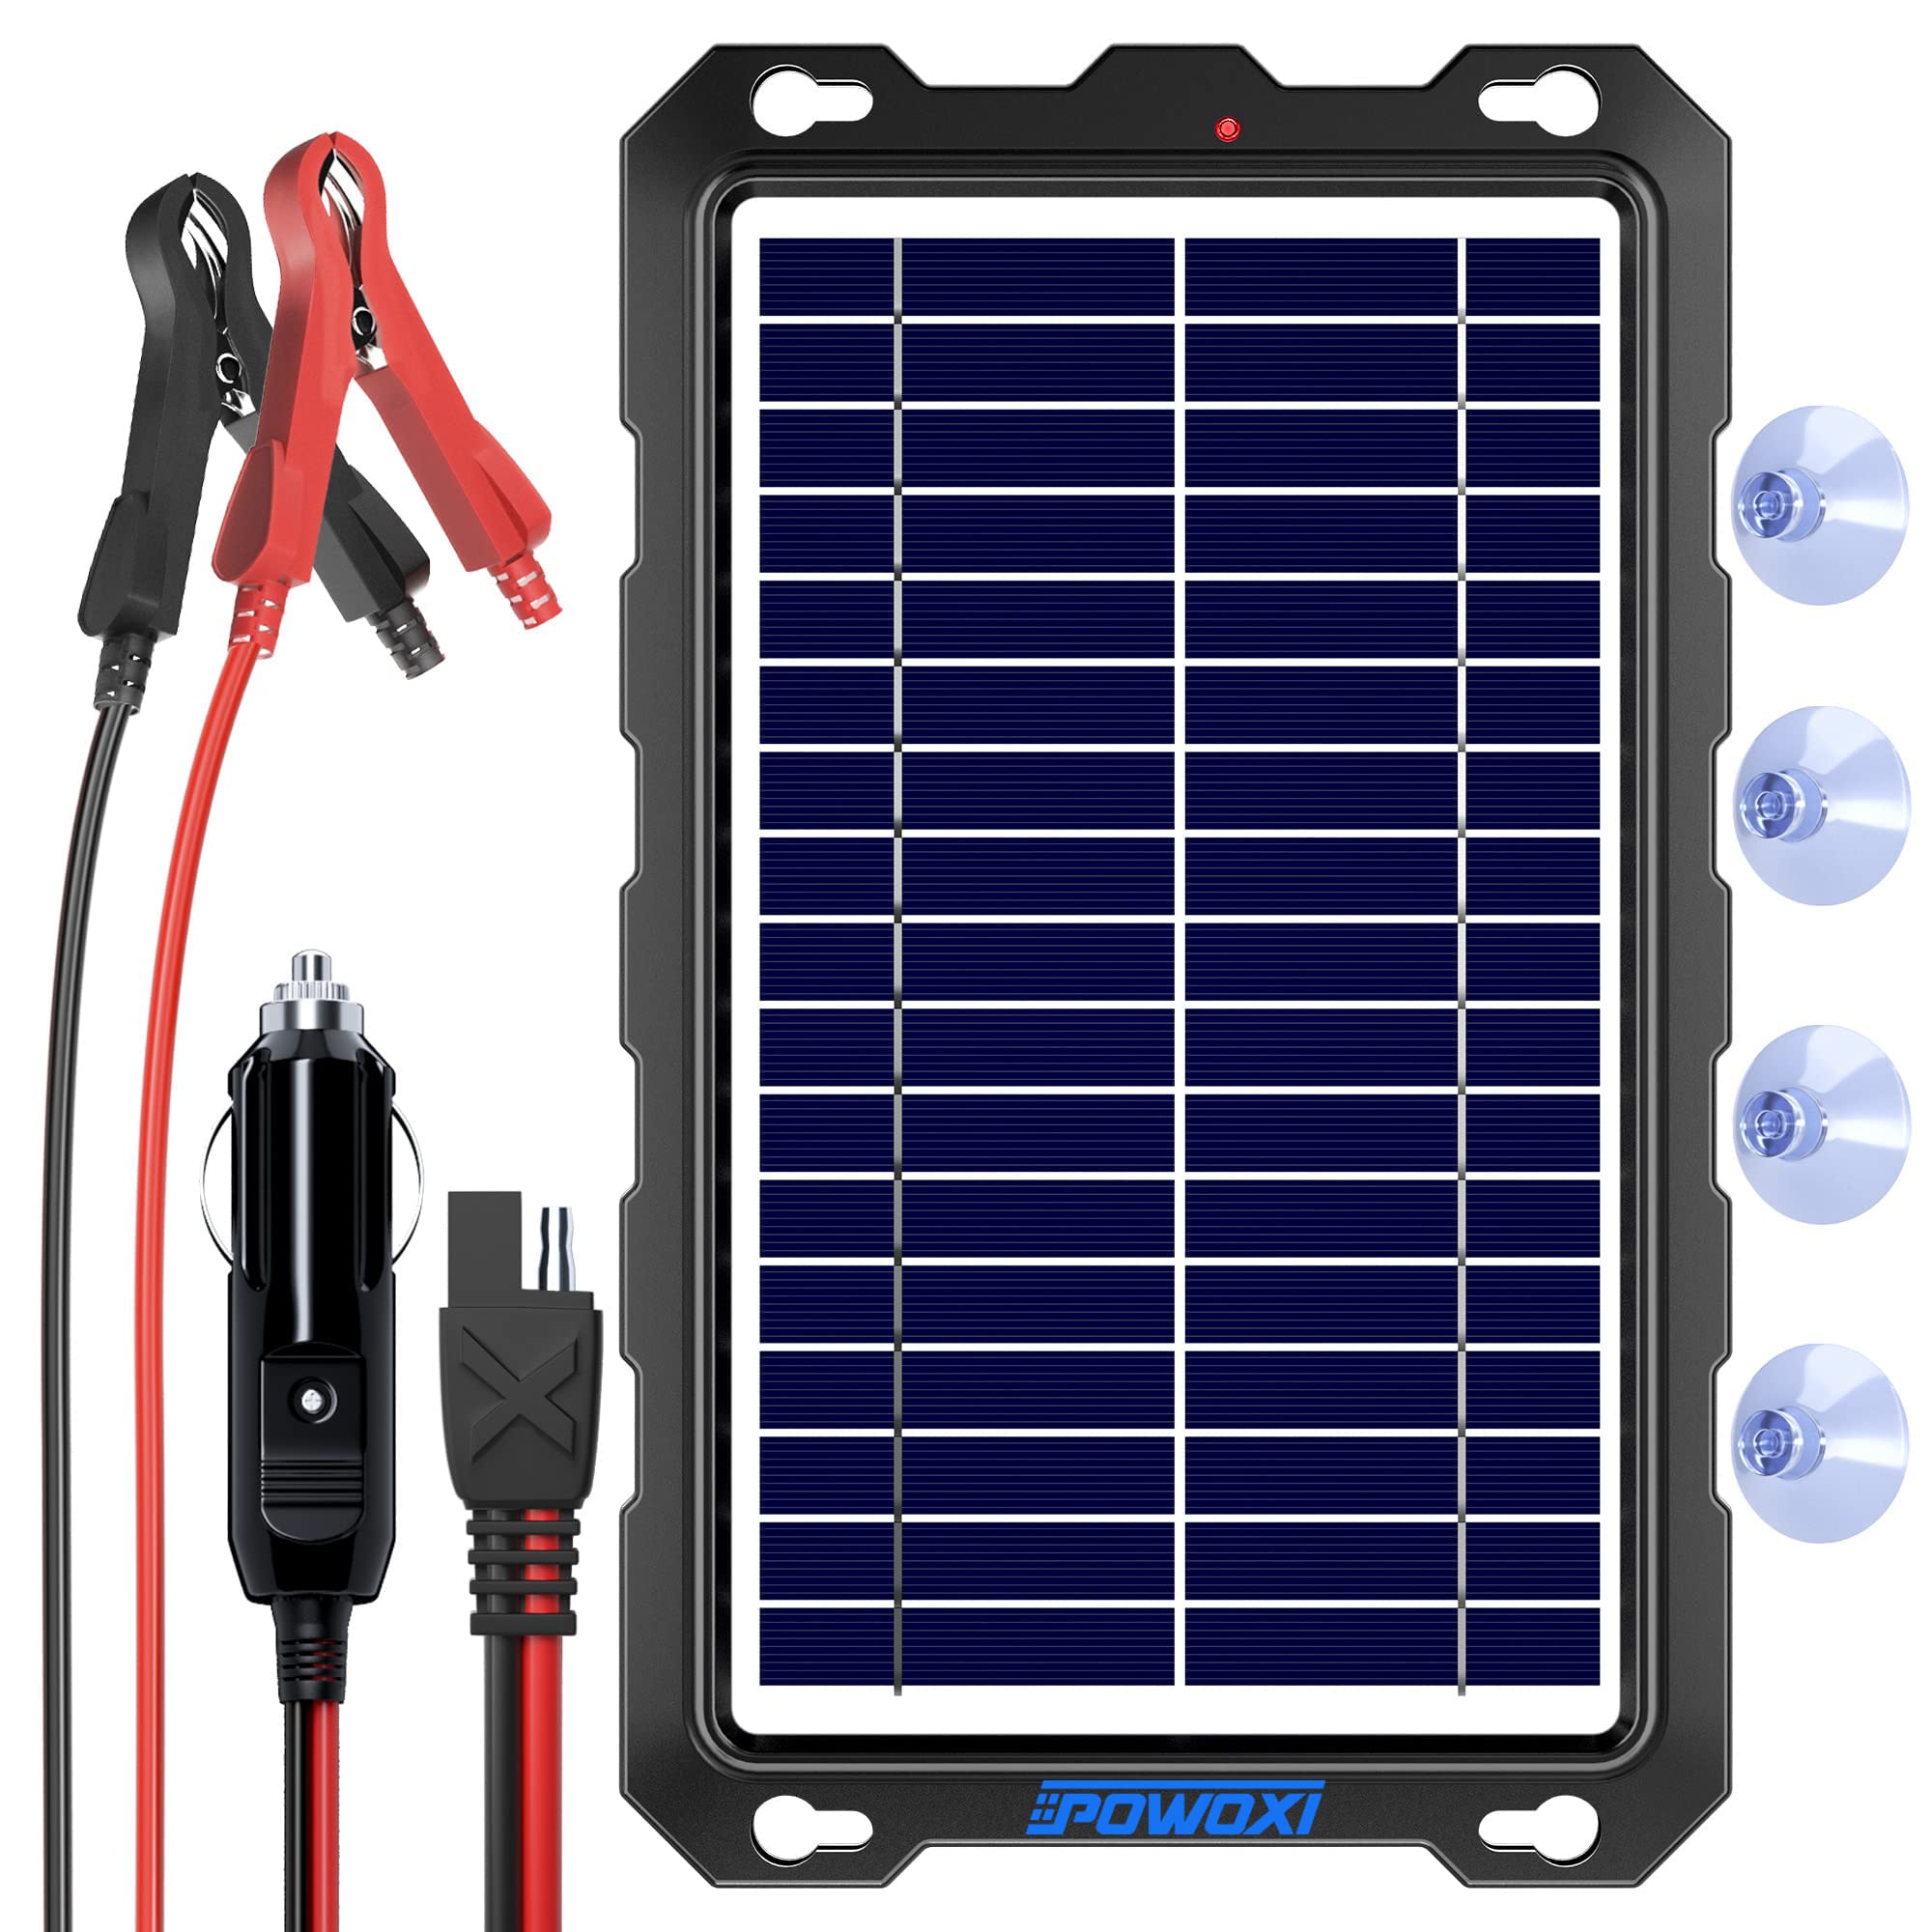 Upgraded 7.5W-Solar-Battery-Trickle-Charger-Maintainer-12V Portable Waterproof Solar Panel Trickle Charging Kit for Car, Automotive, Motorcycle, Boat, Marine, RV,Trailer,Powersports, Snowmobile, etc. - image 1 of 9